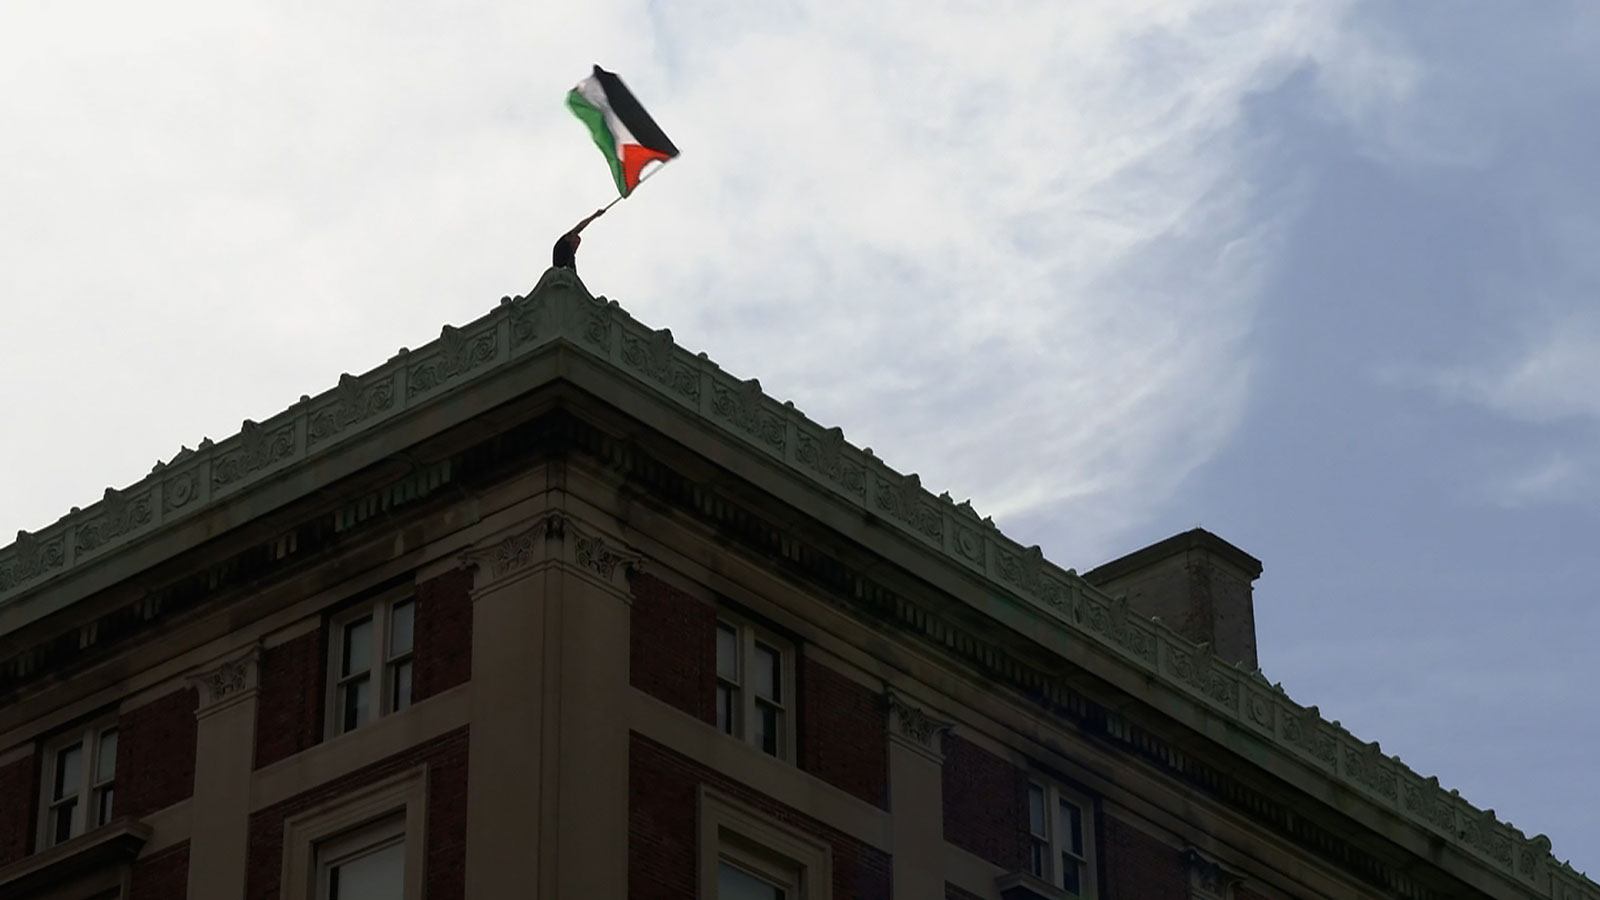 A protester waves a Palestinian flag from the roof of Hamilton Hall at Columbia University in New York on Tuesday.